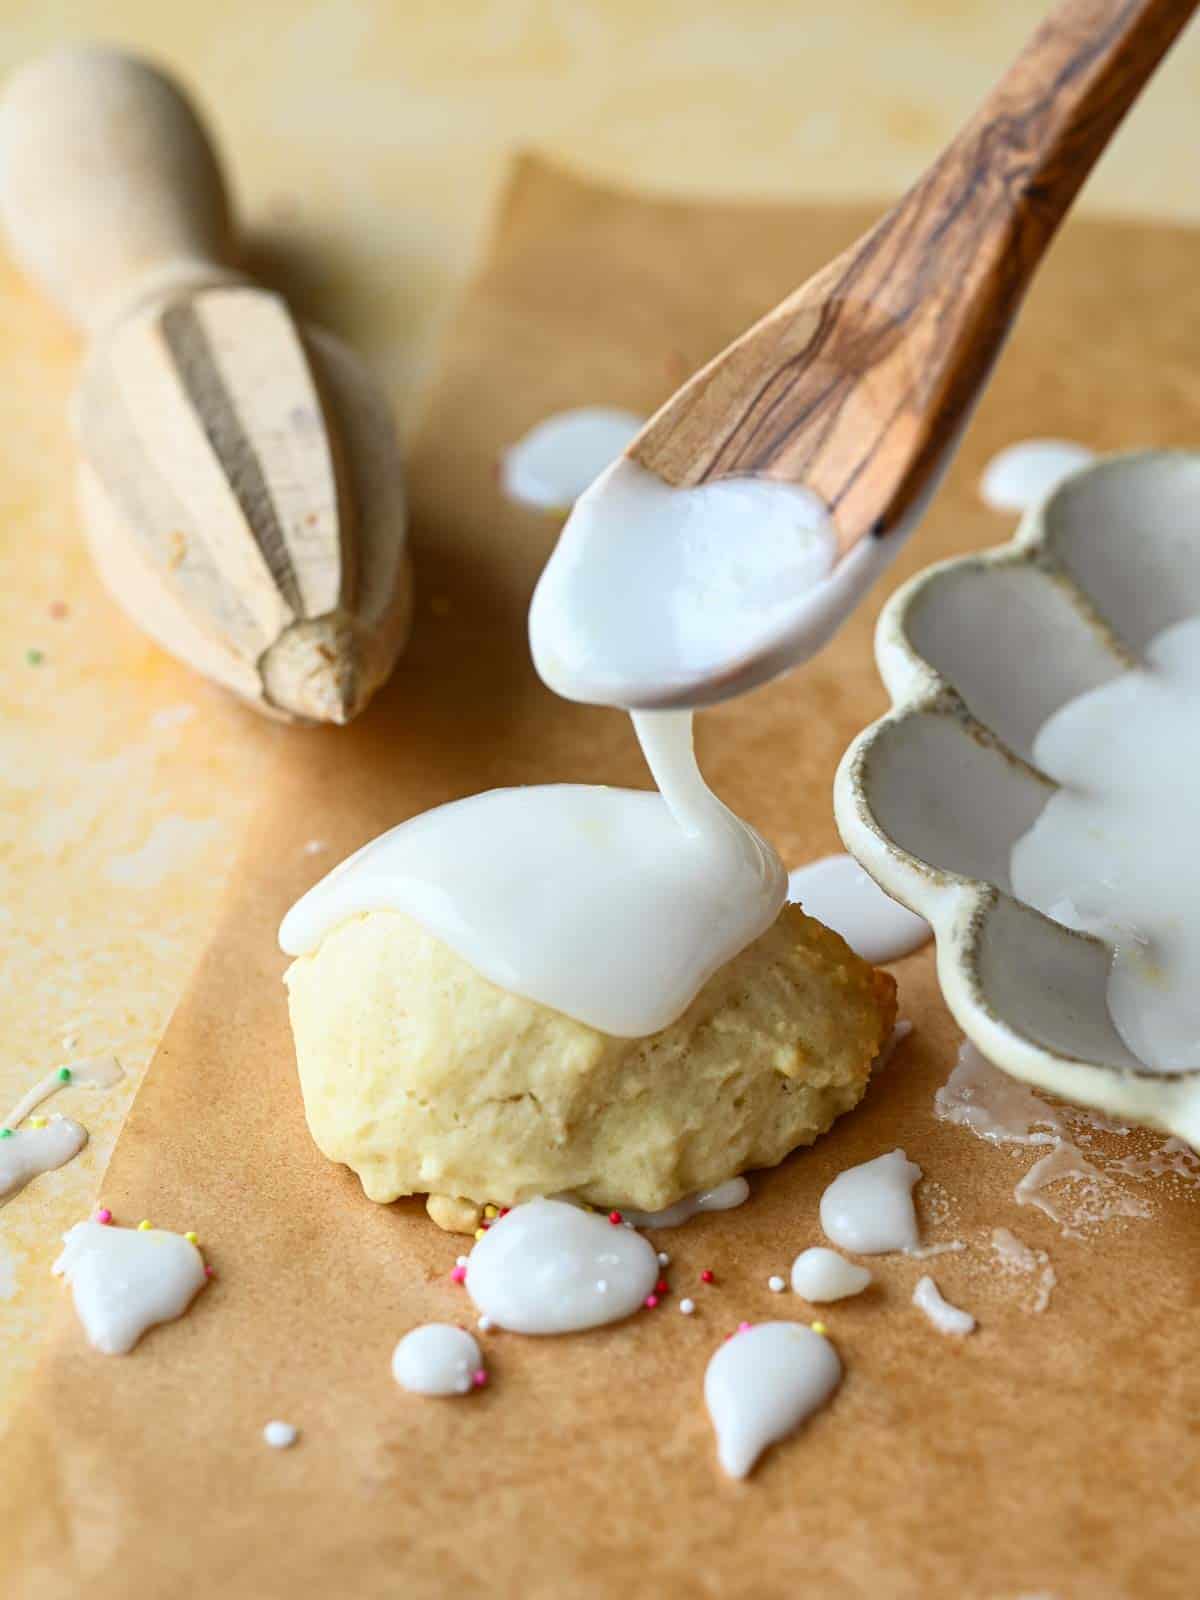 Lemon icing being dripped by a spoon over a cookie on top of brown parchment paper.